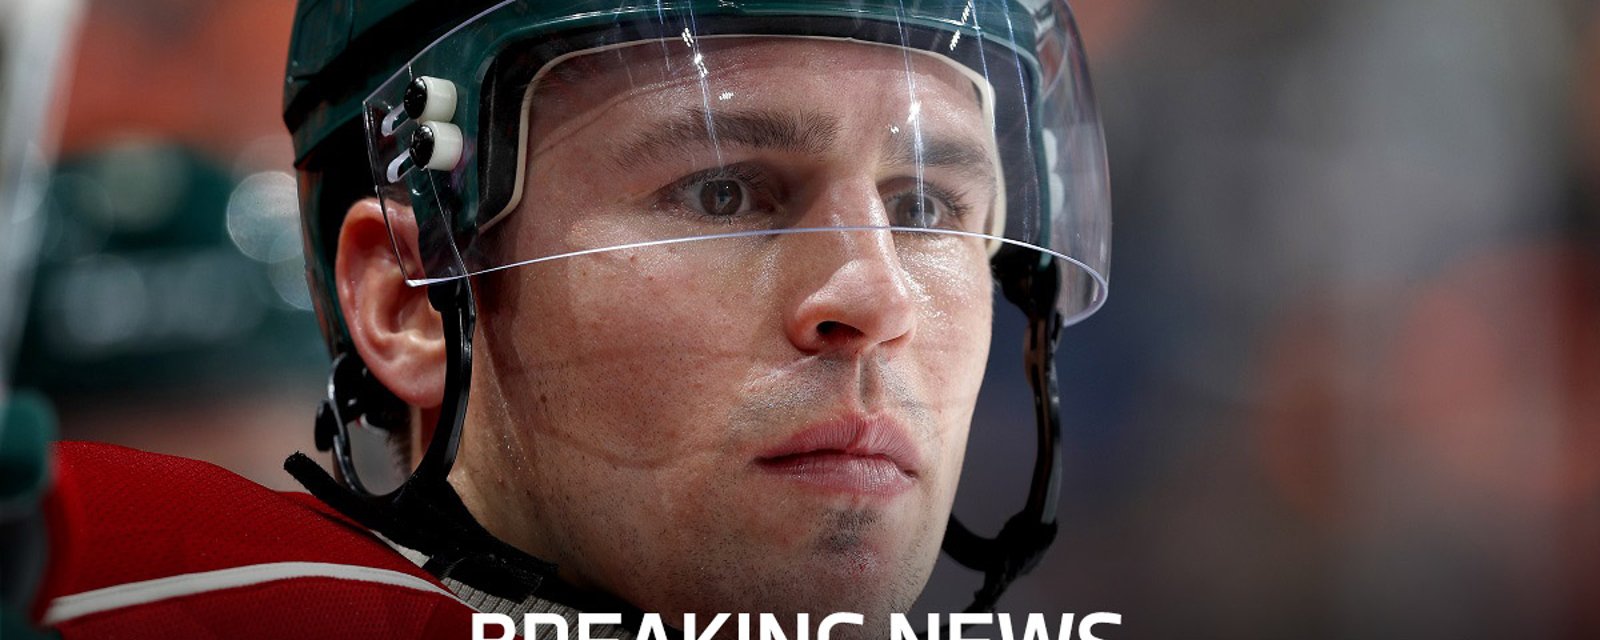 Rumor: The Minnesota Wild have just traded Zach Parise in a shocking move!